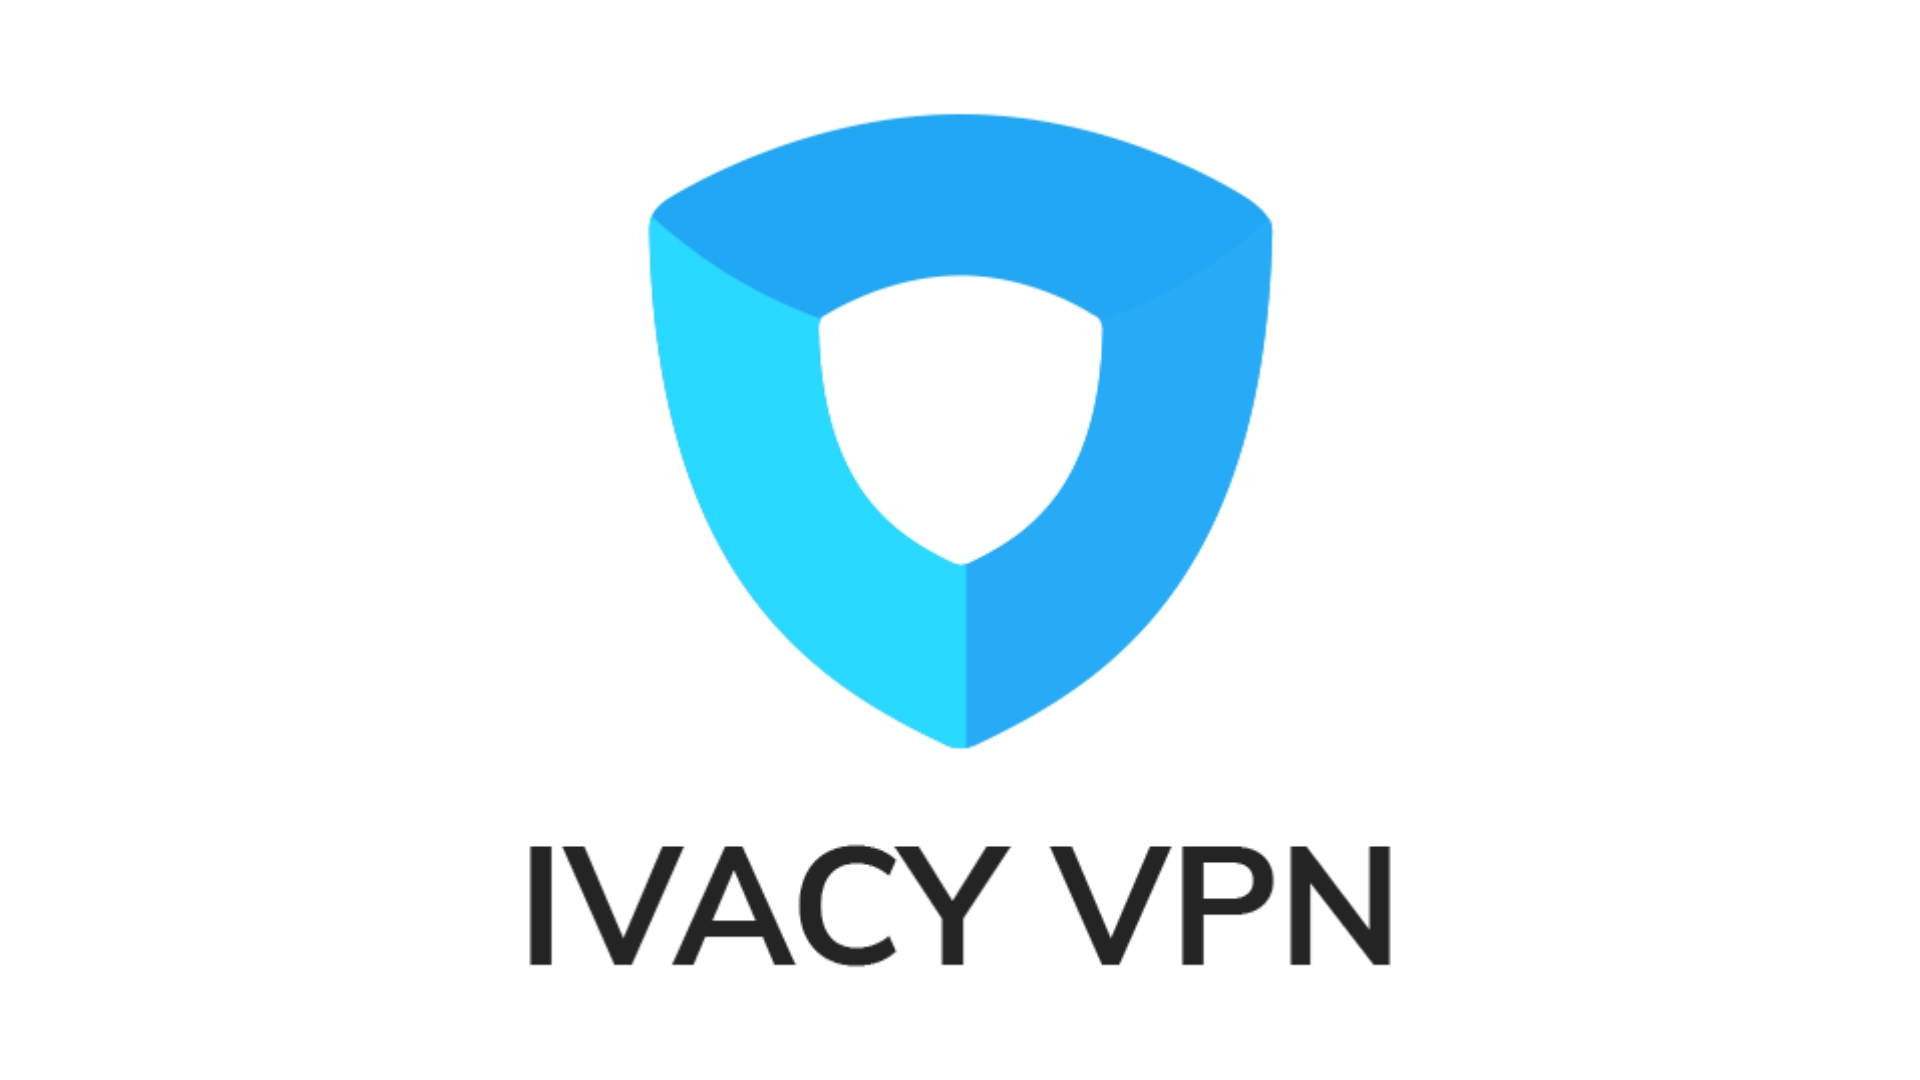 Best Canadian VPN: Ivacy VPN. Image shows the company logo.